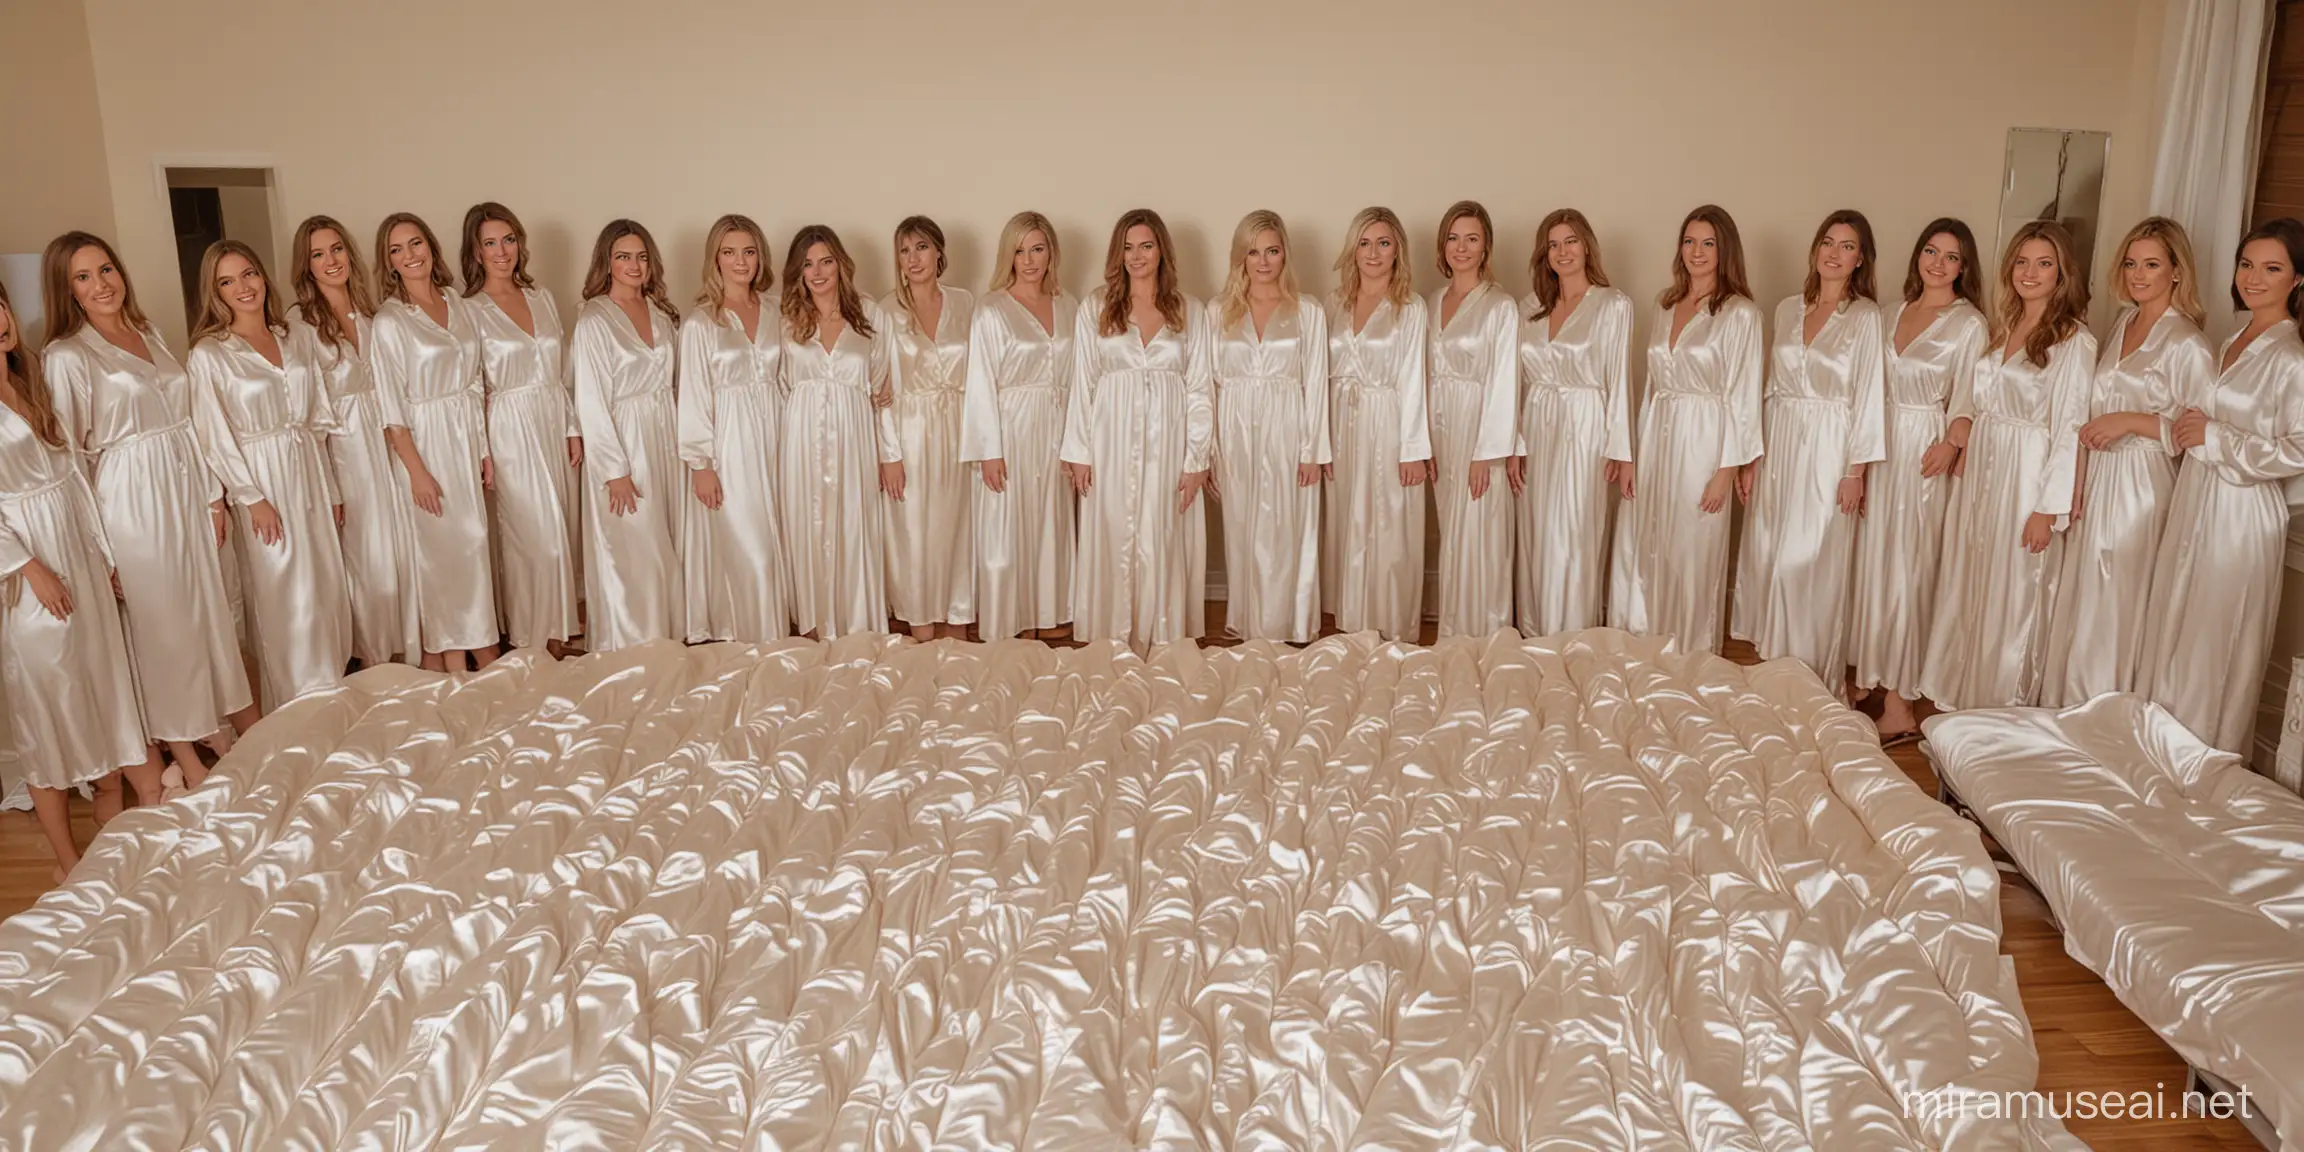 Gathering of Women in Creamy White Satin Nightgowns on Satin Bed